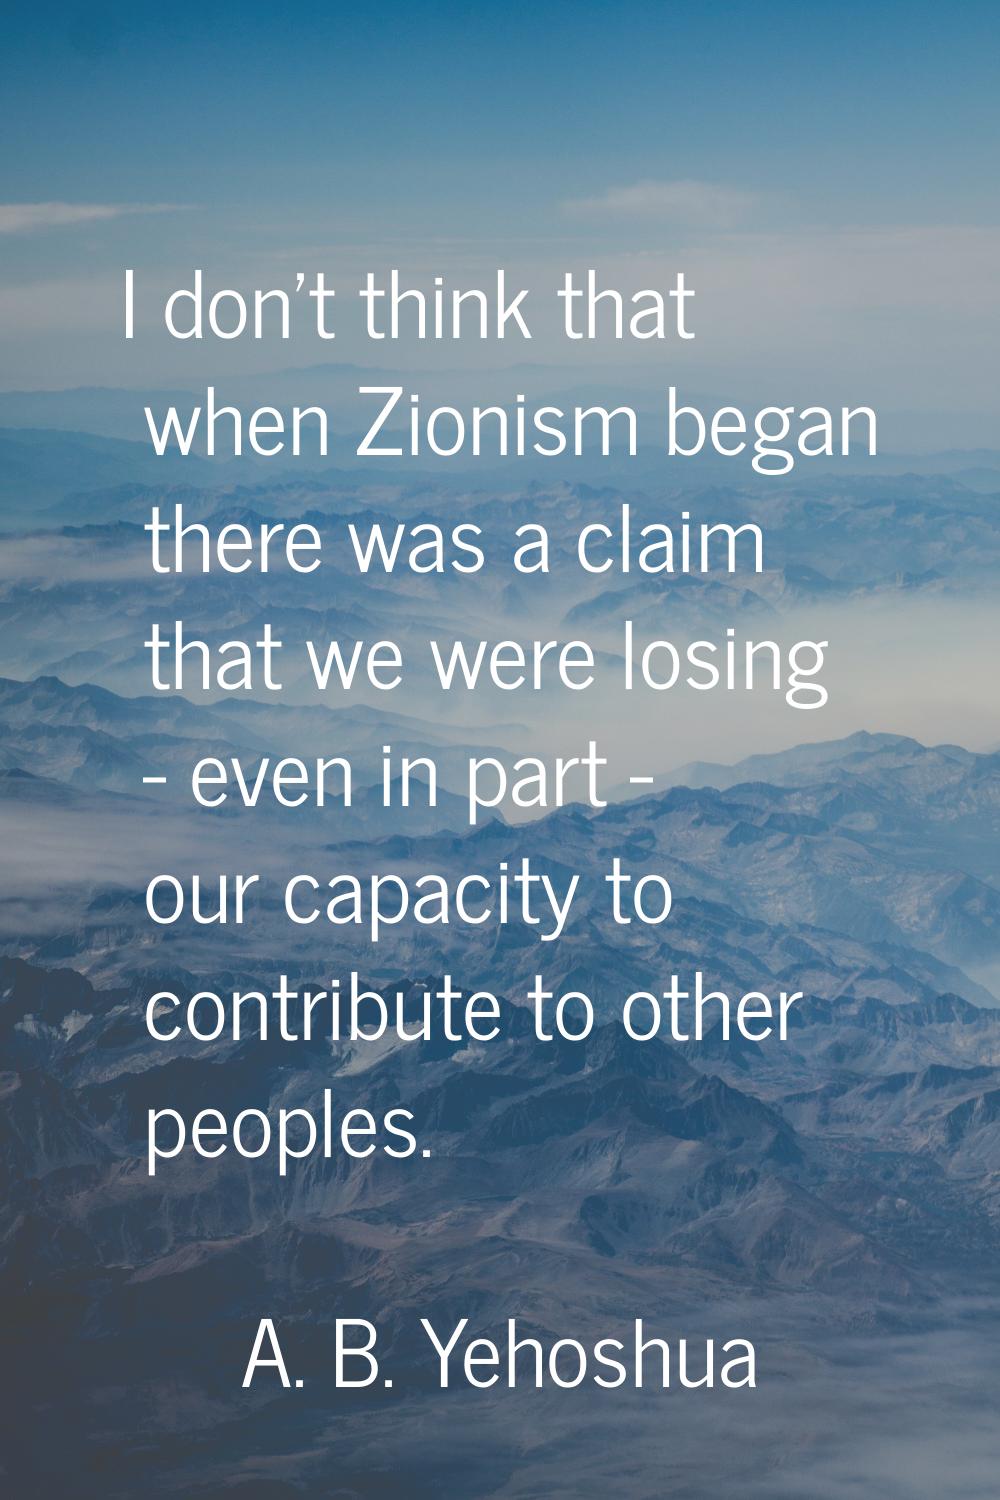 I don't think that when Zionism began there was a claim that we were losing - even in part - our ca